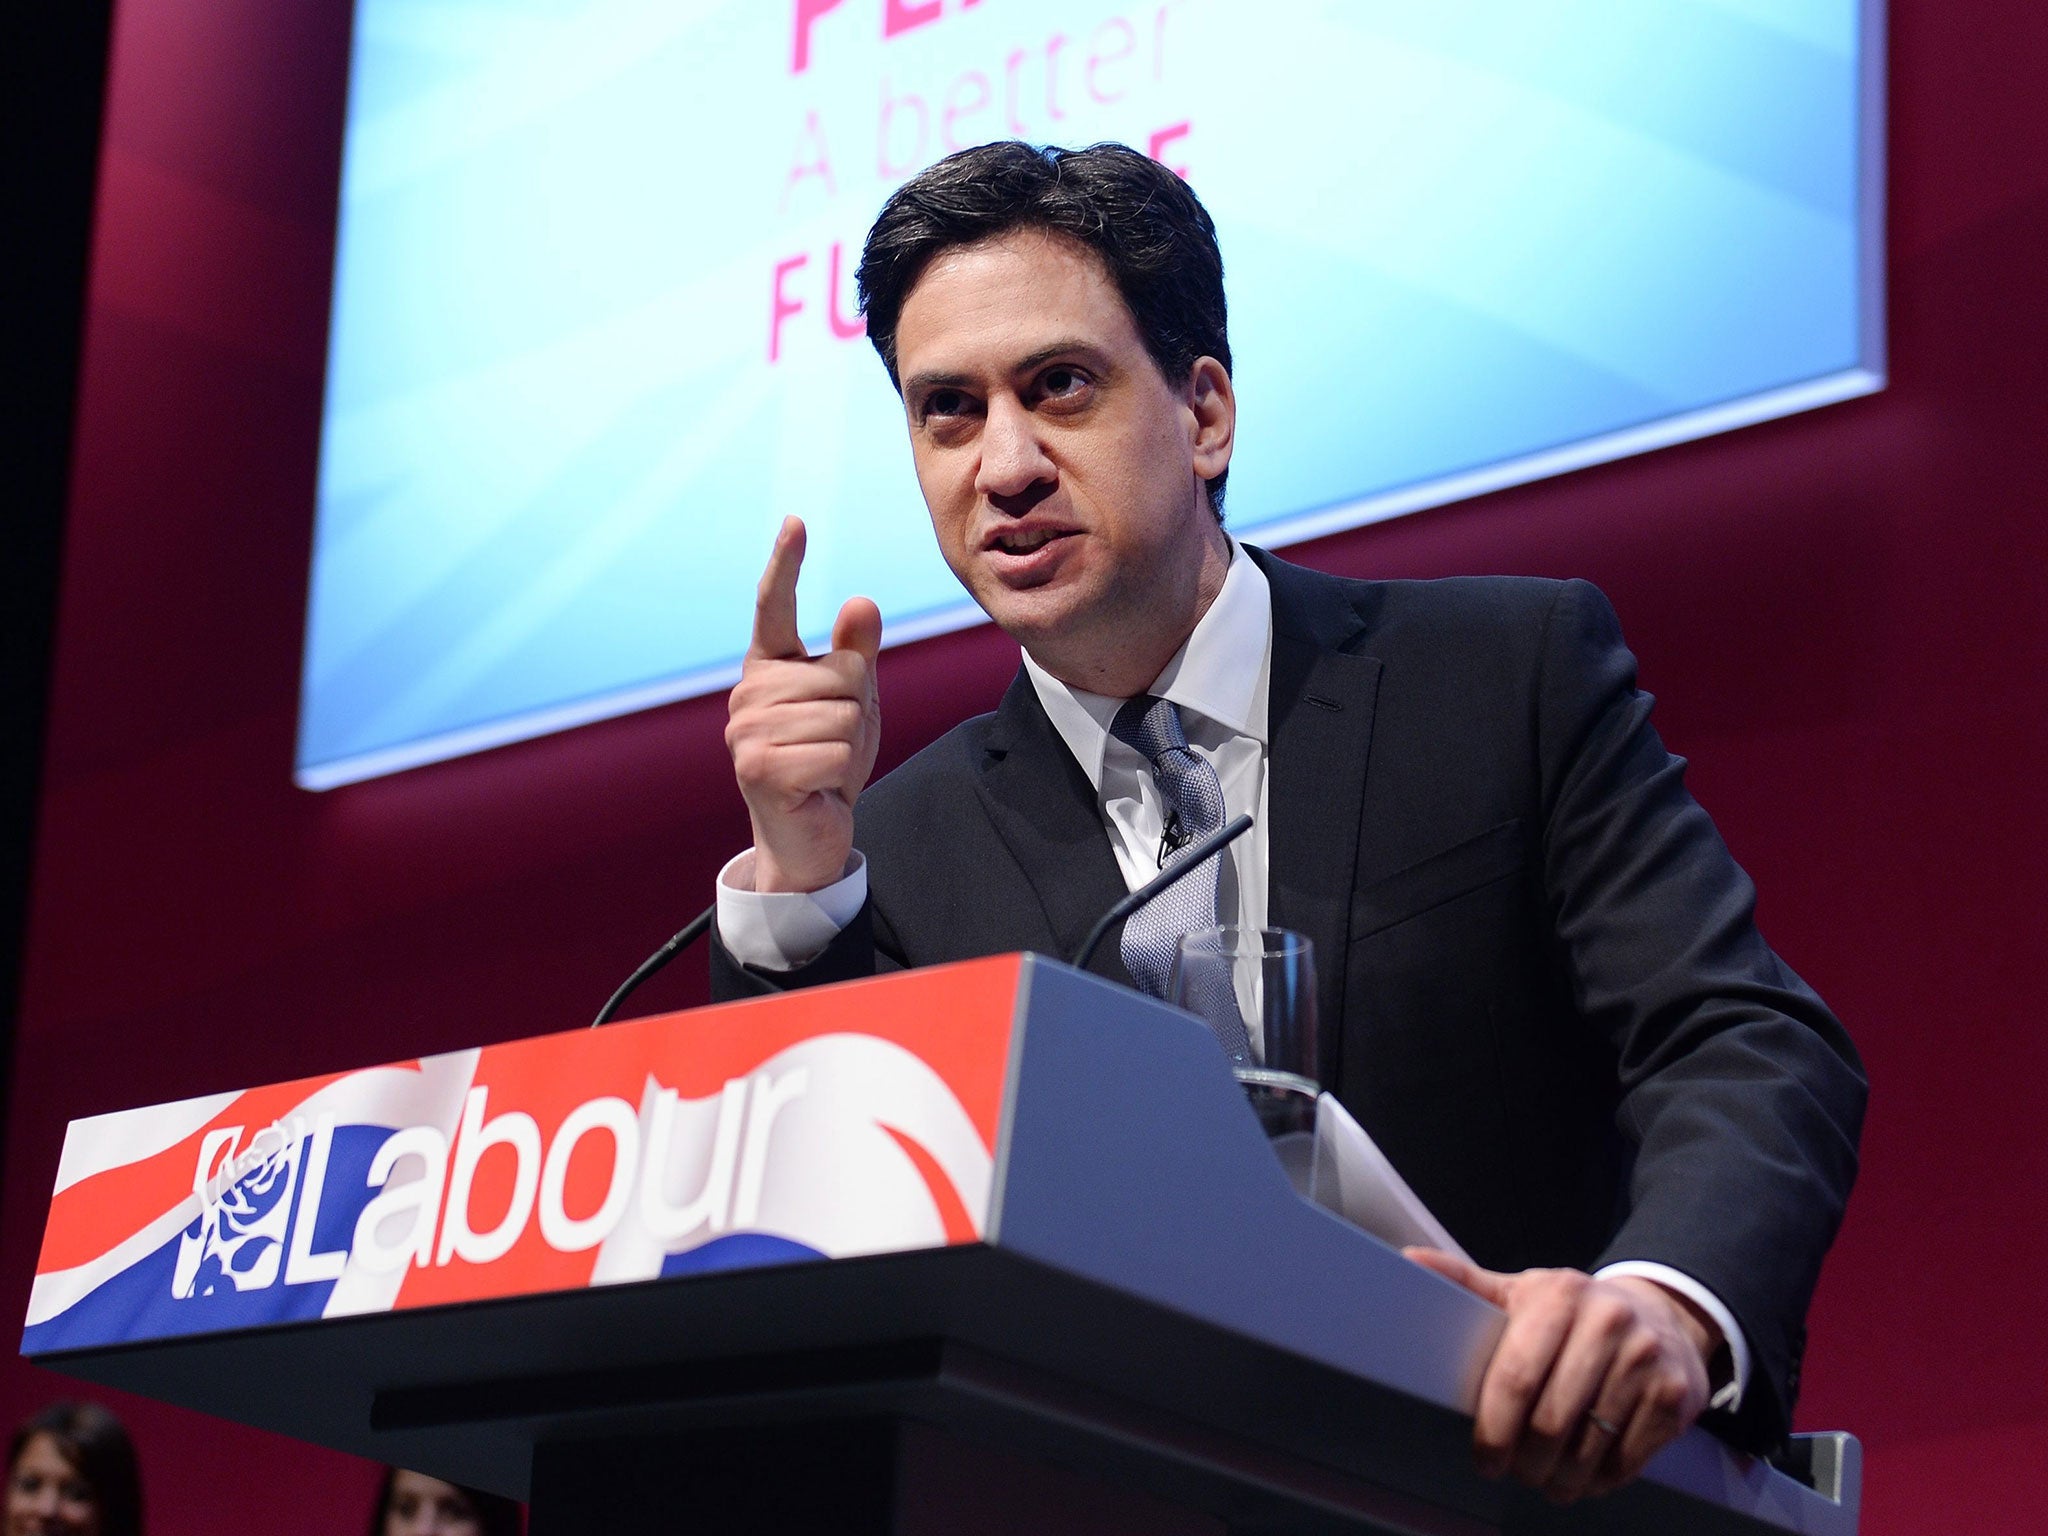 The Labour leader Ed Miliband speaking at his party's manifesto launch